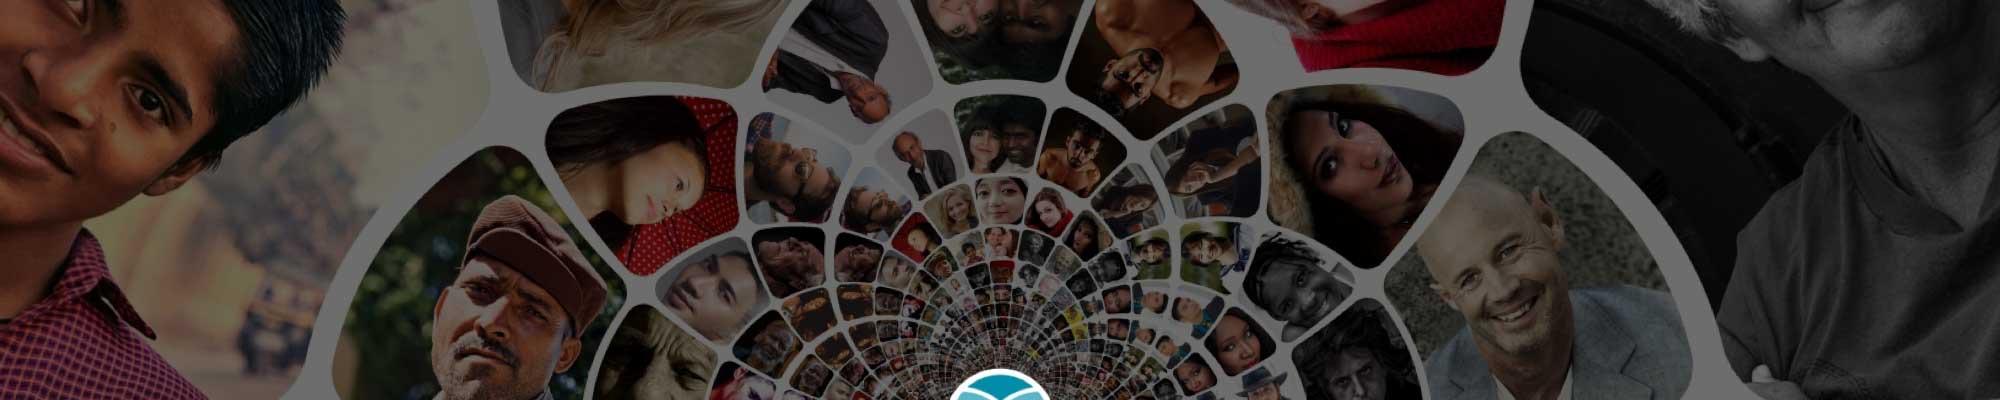 Image of people with Unity logo in the center.